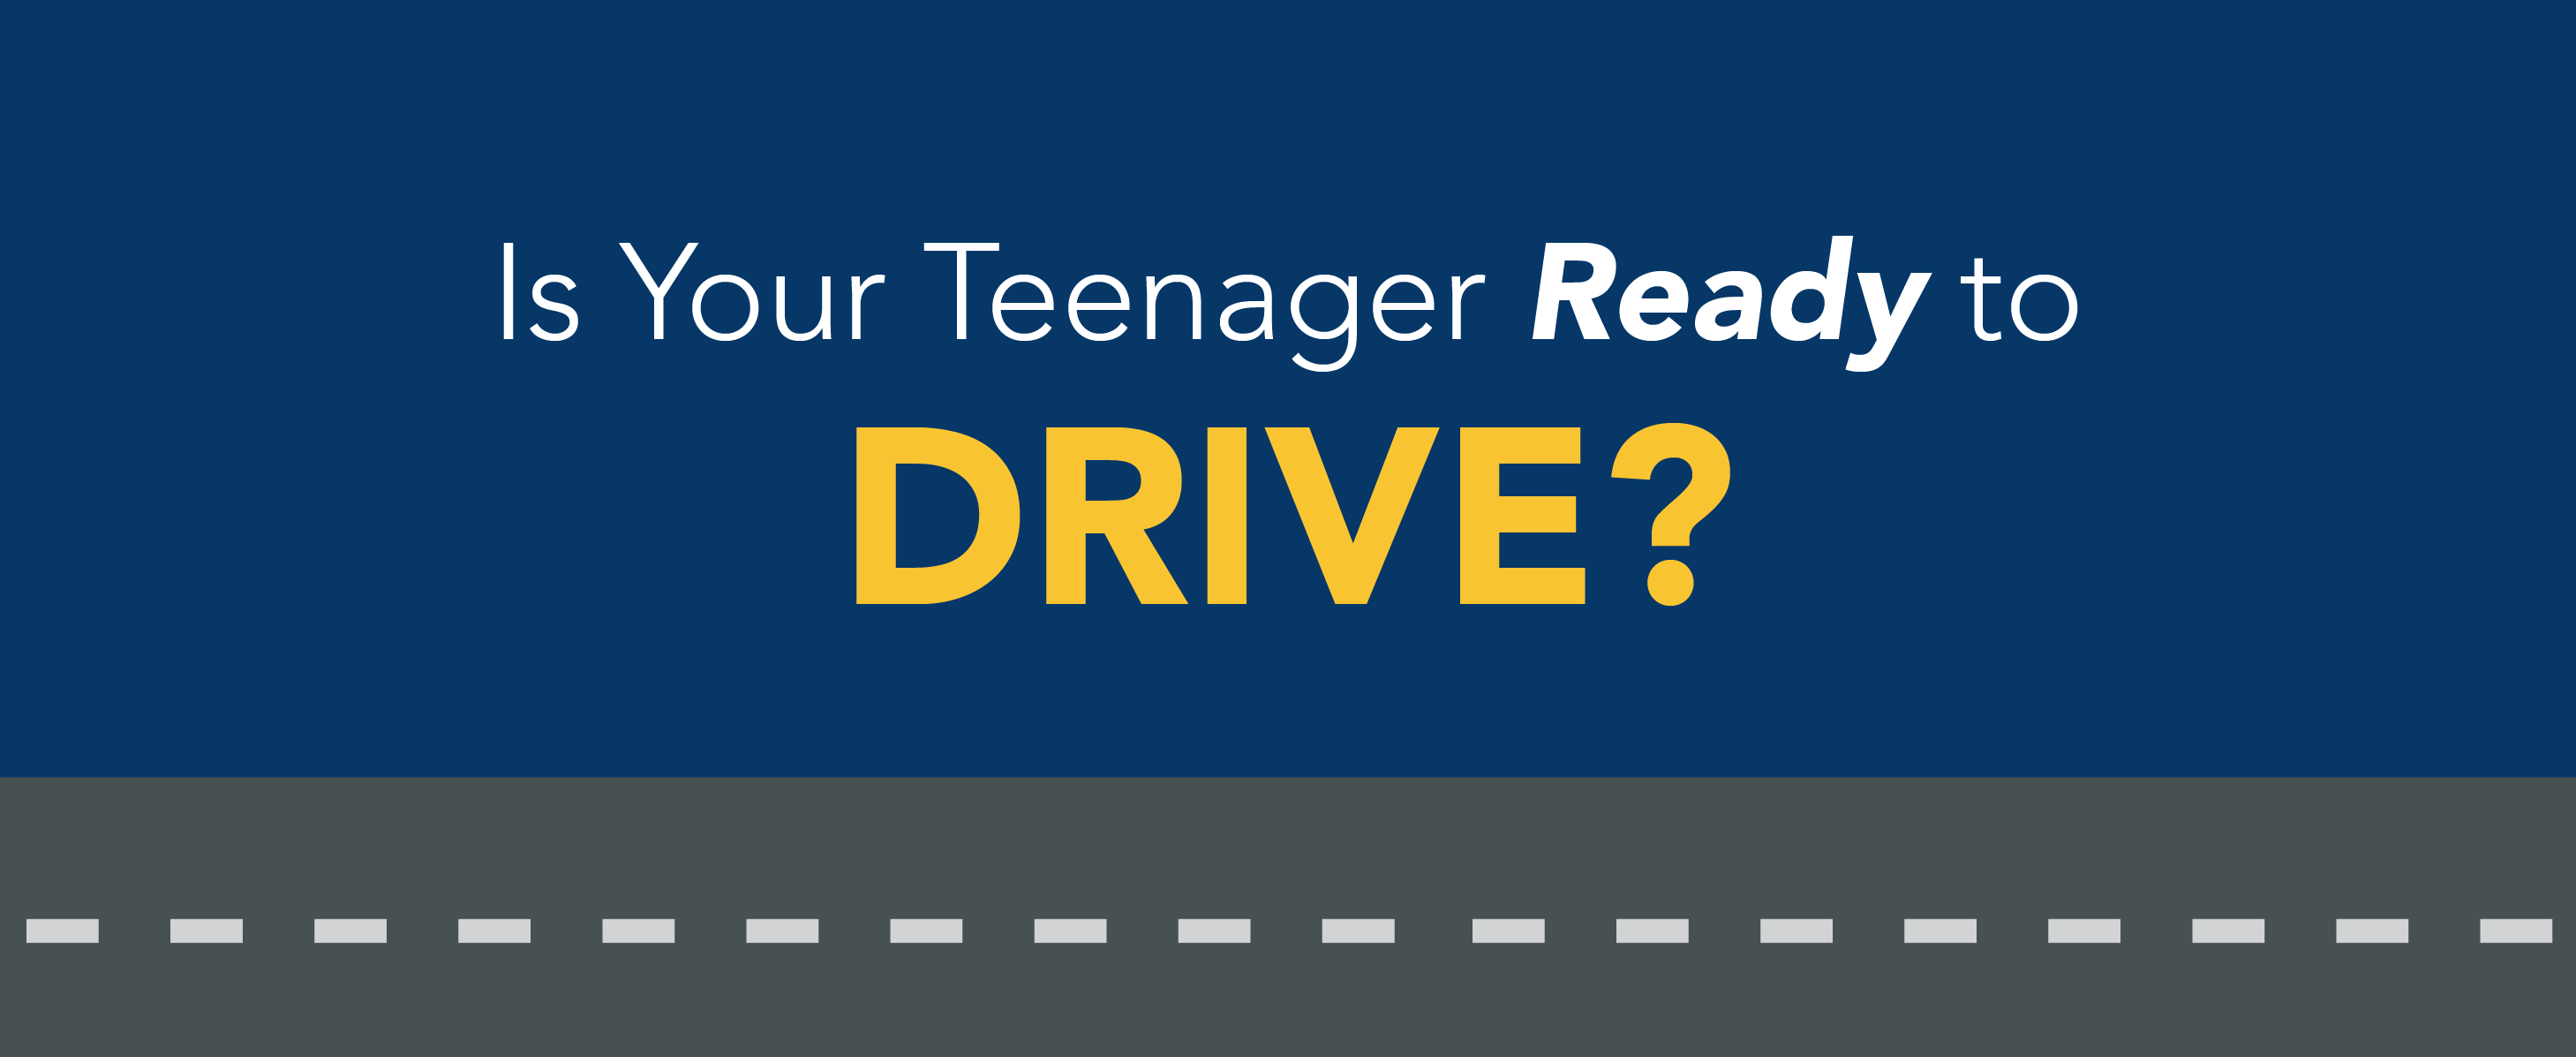 Is your teenager ready to drive?